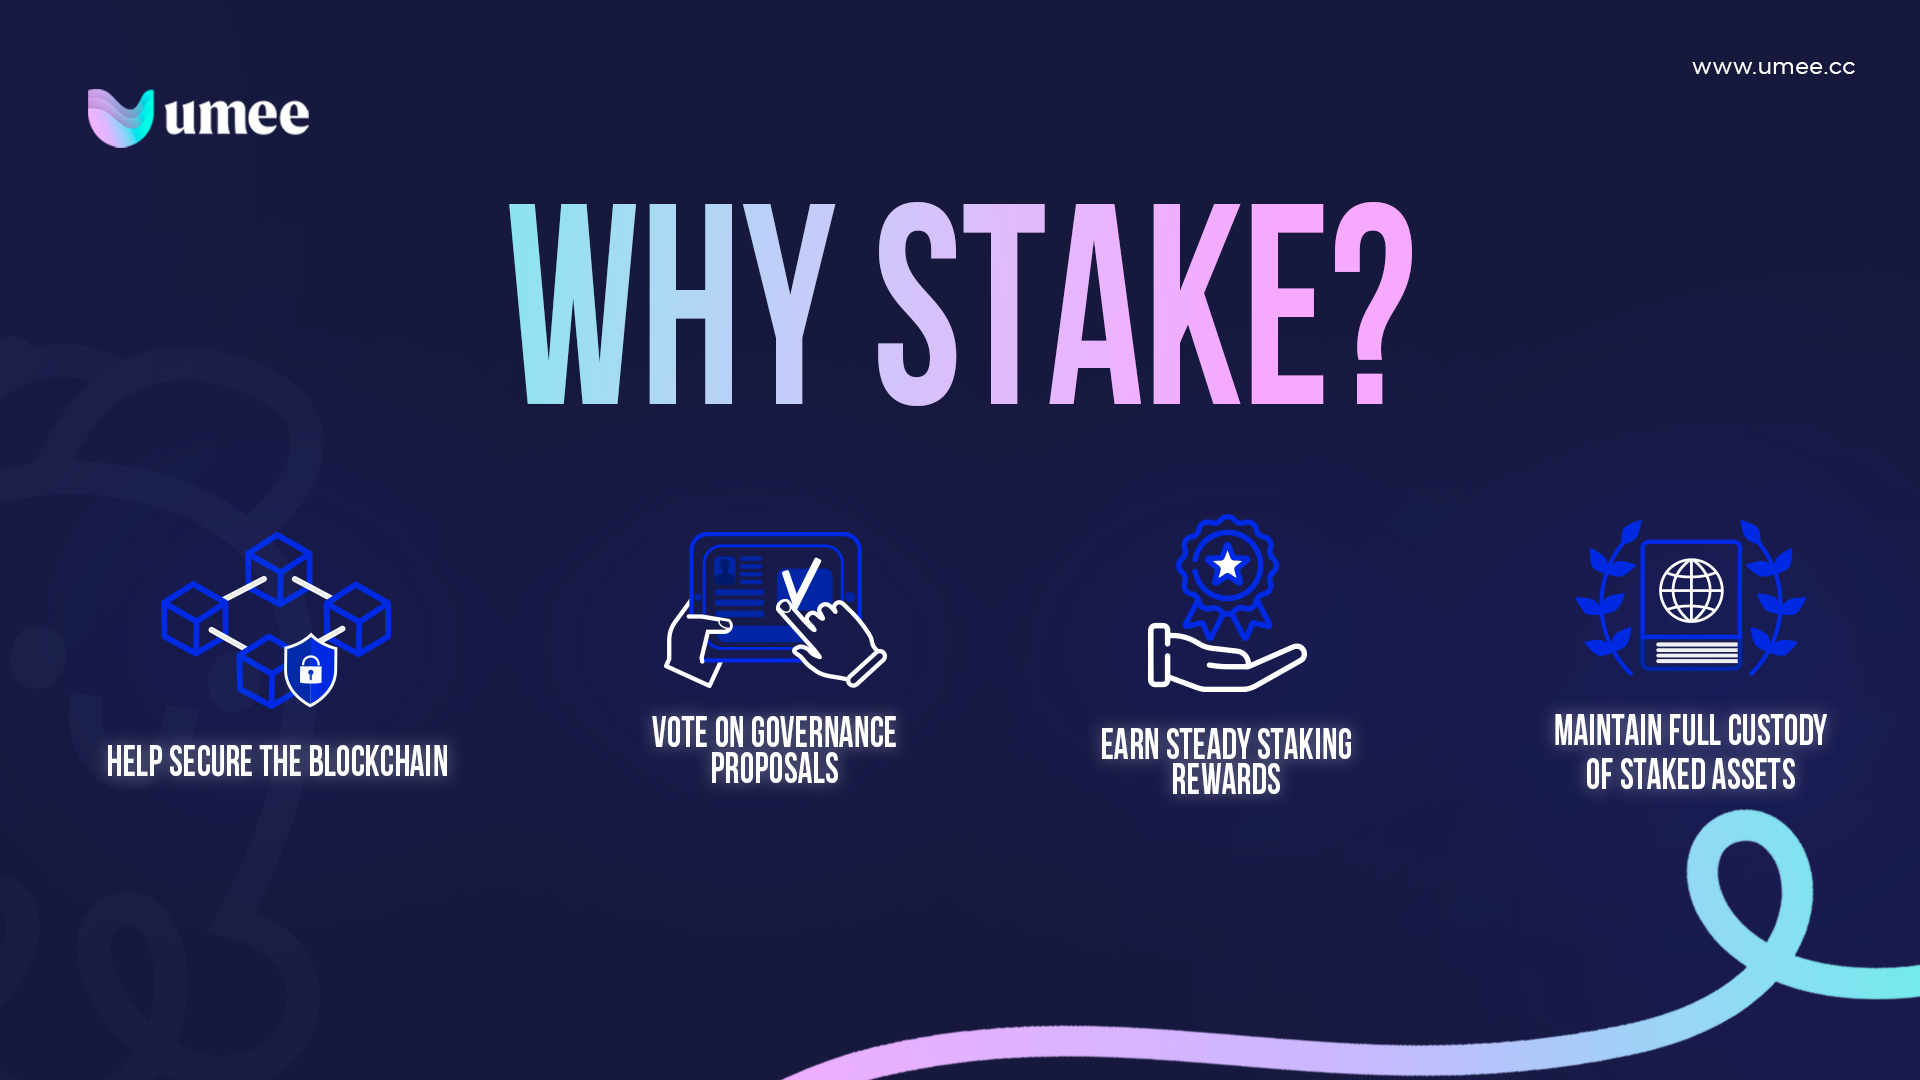 Stake UMEE to help secure the blockchain, vote on governance proposals, and earn steady staking rewards